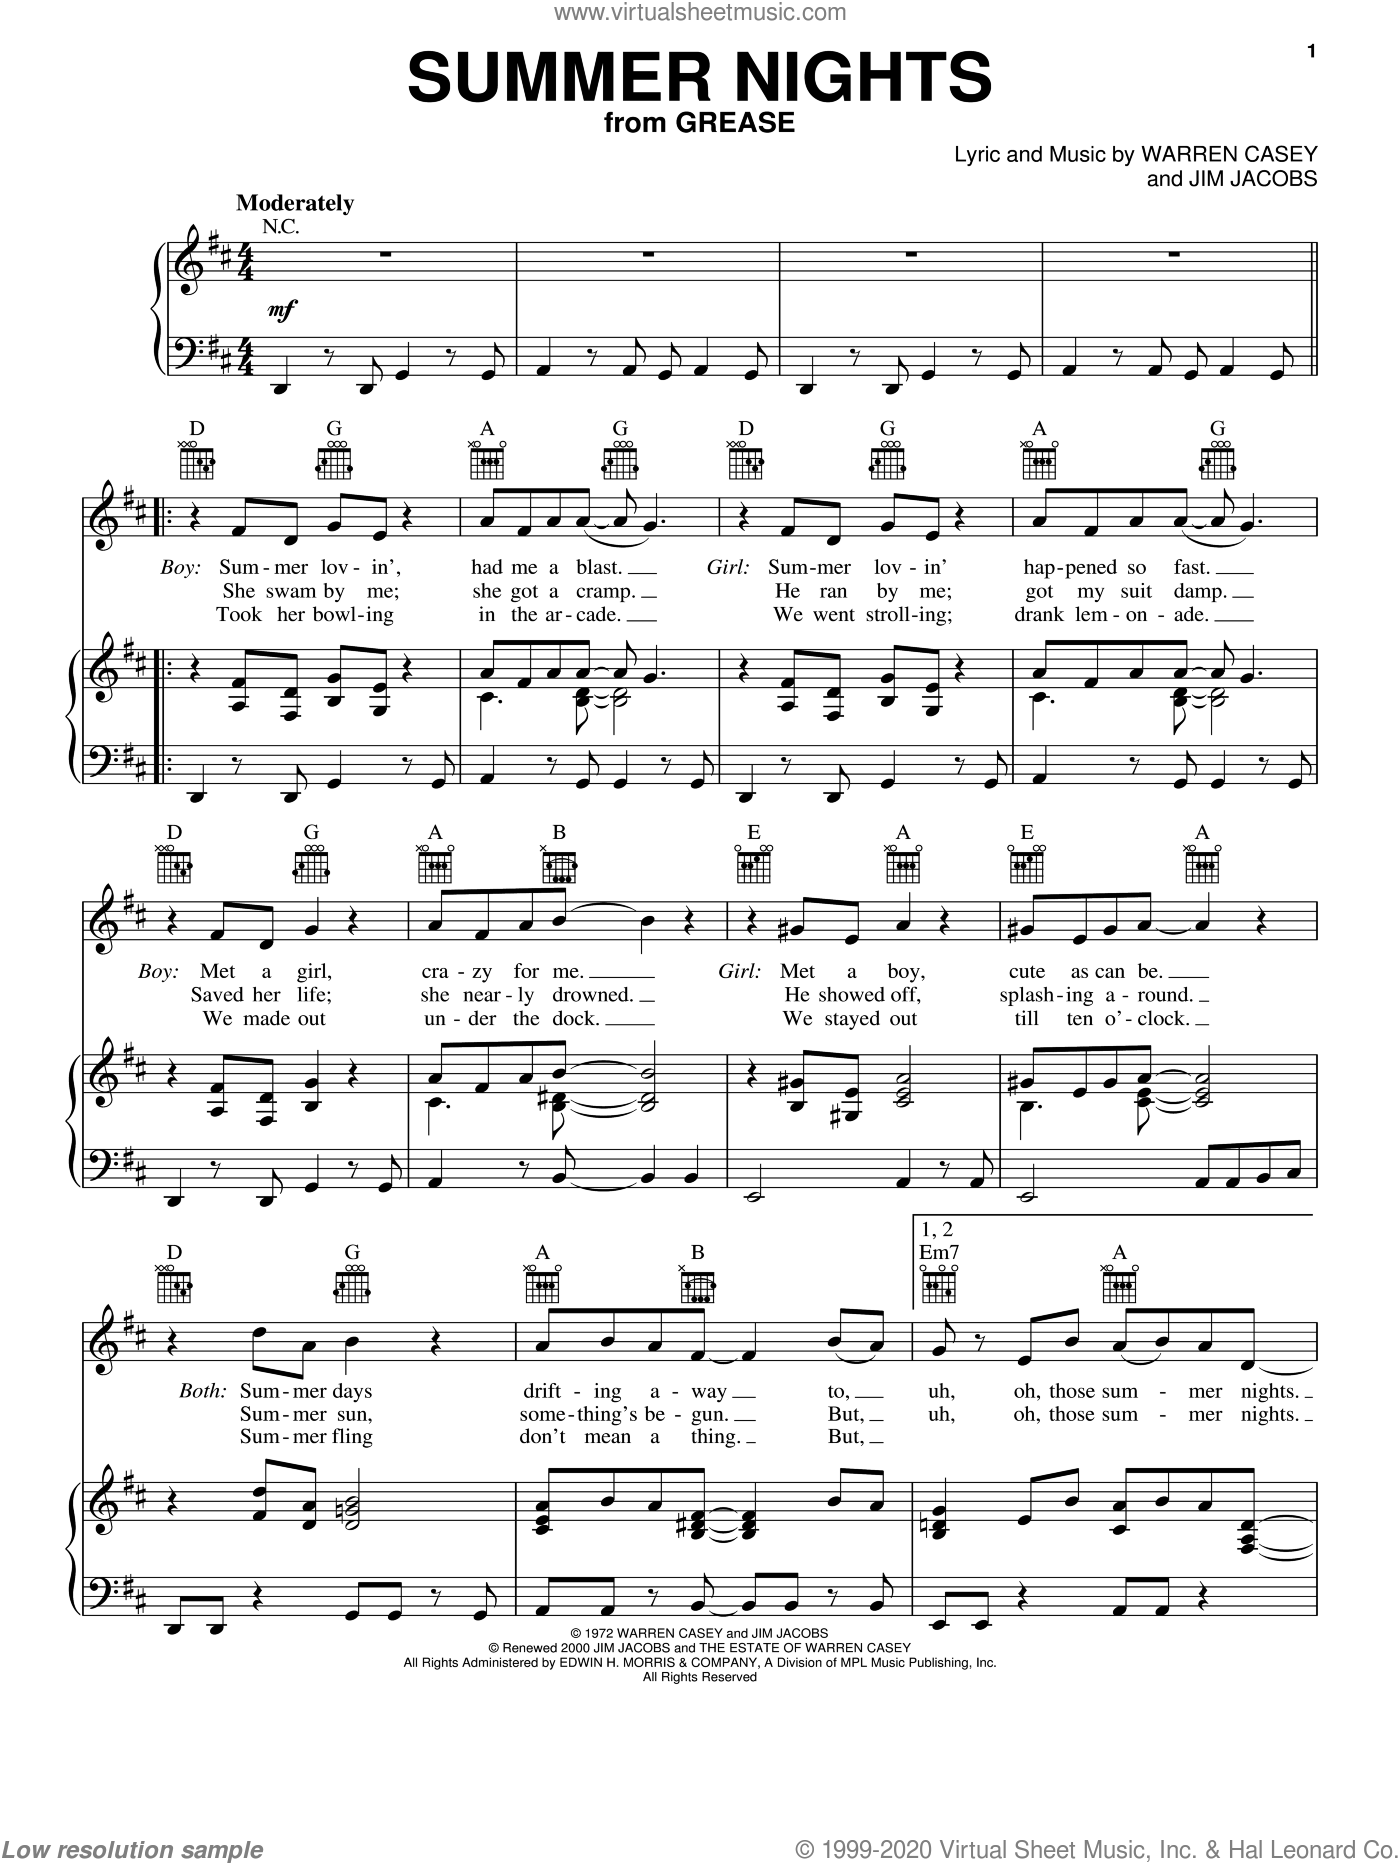 Summer Nights (from Grease) sheet music for voice, piano or guitar